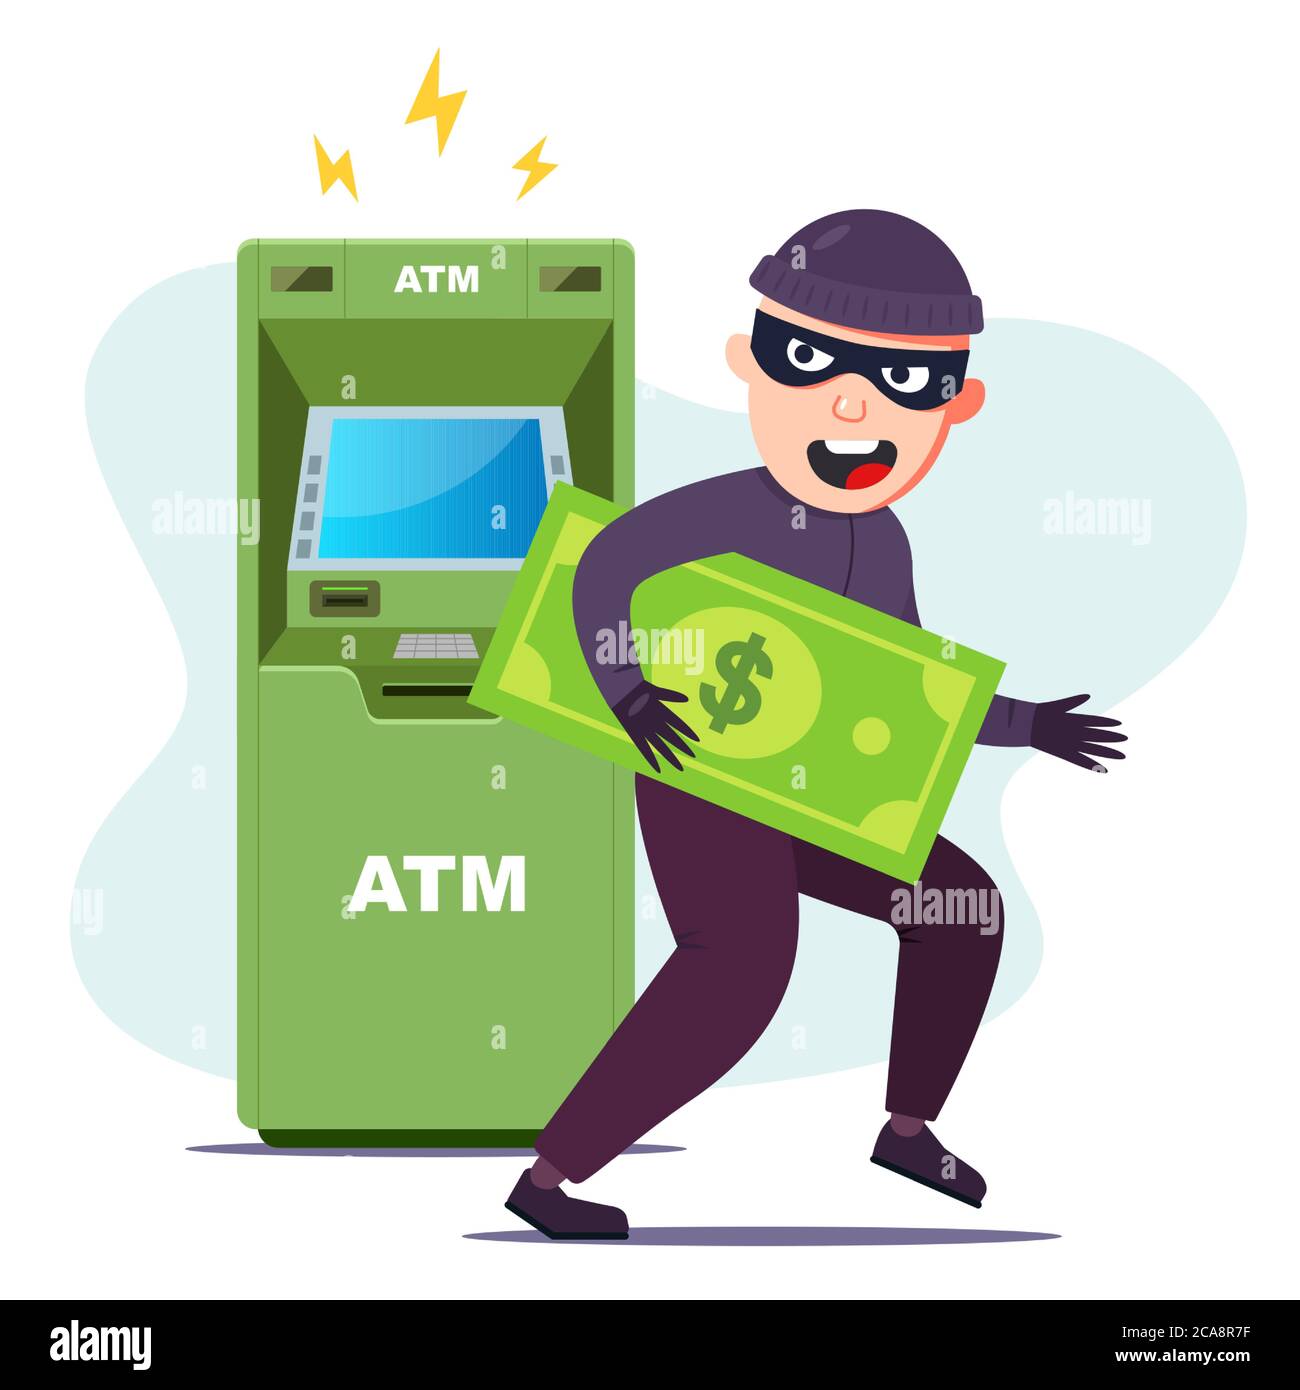 the thief stole money from an ATM. hacking the terminal to steal. Flat character vector illustration. Stock Vector